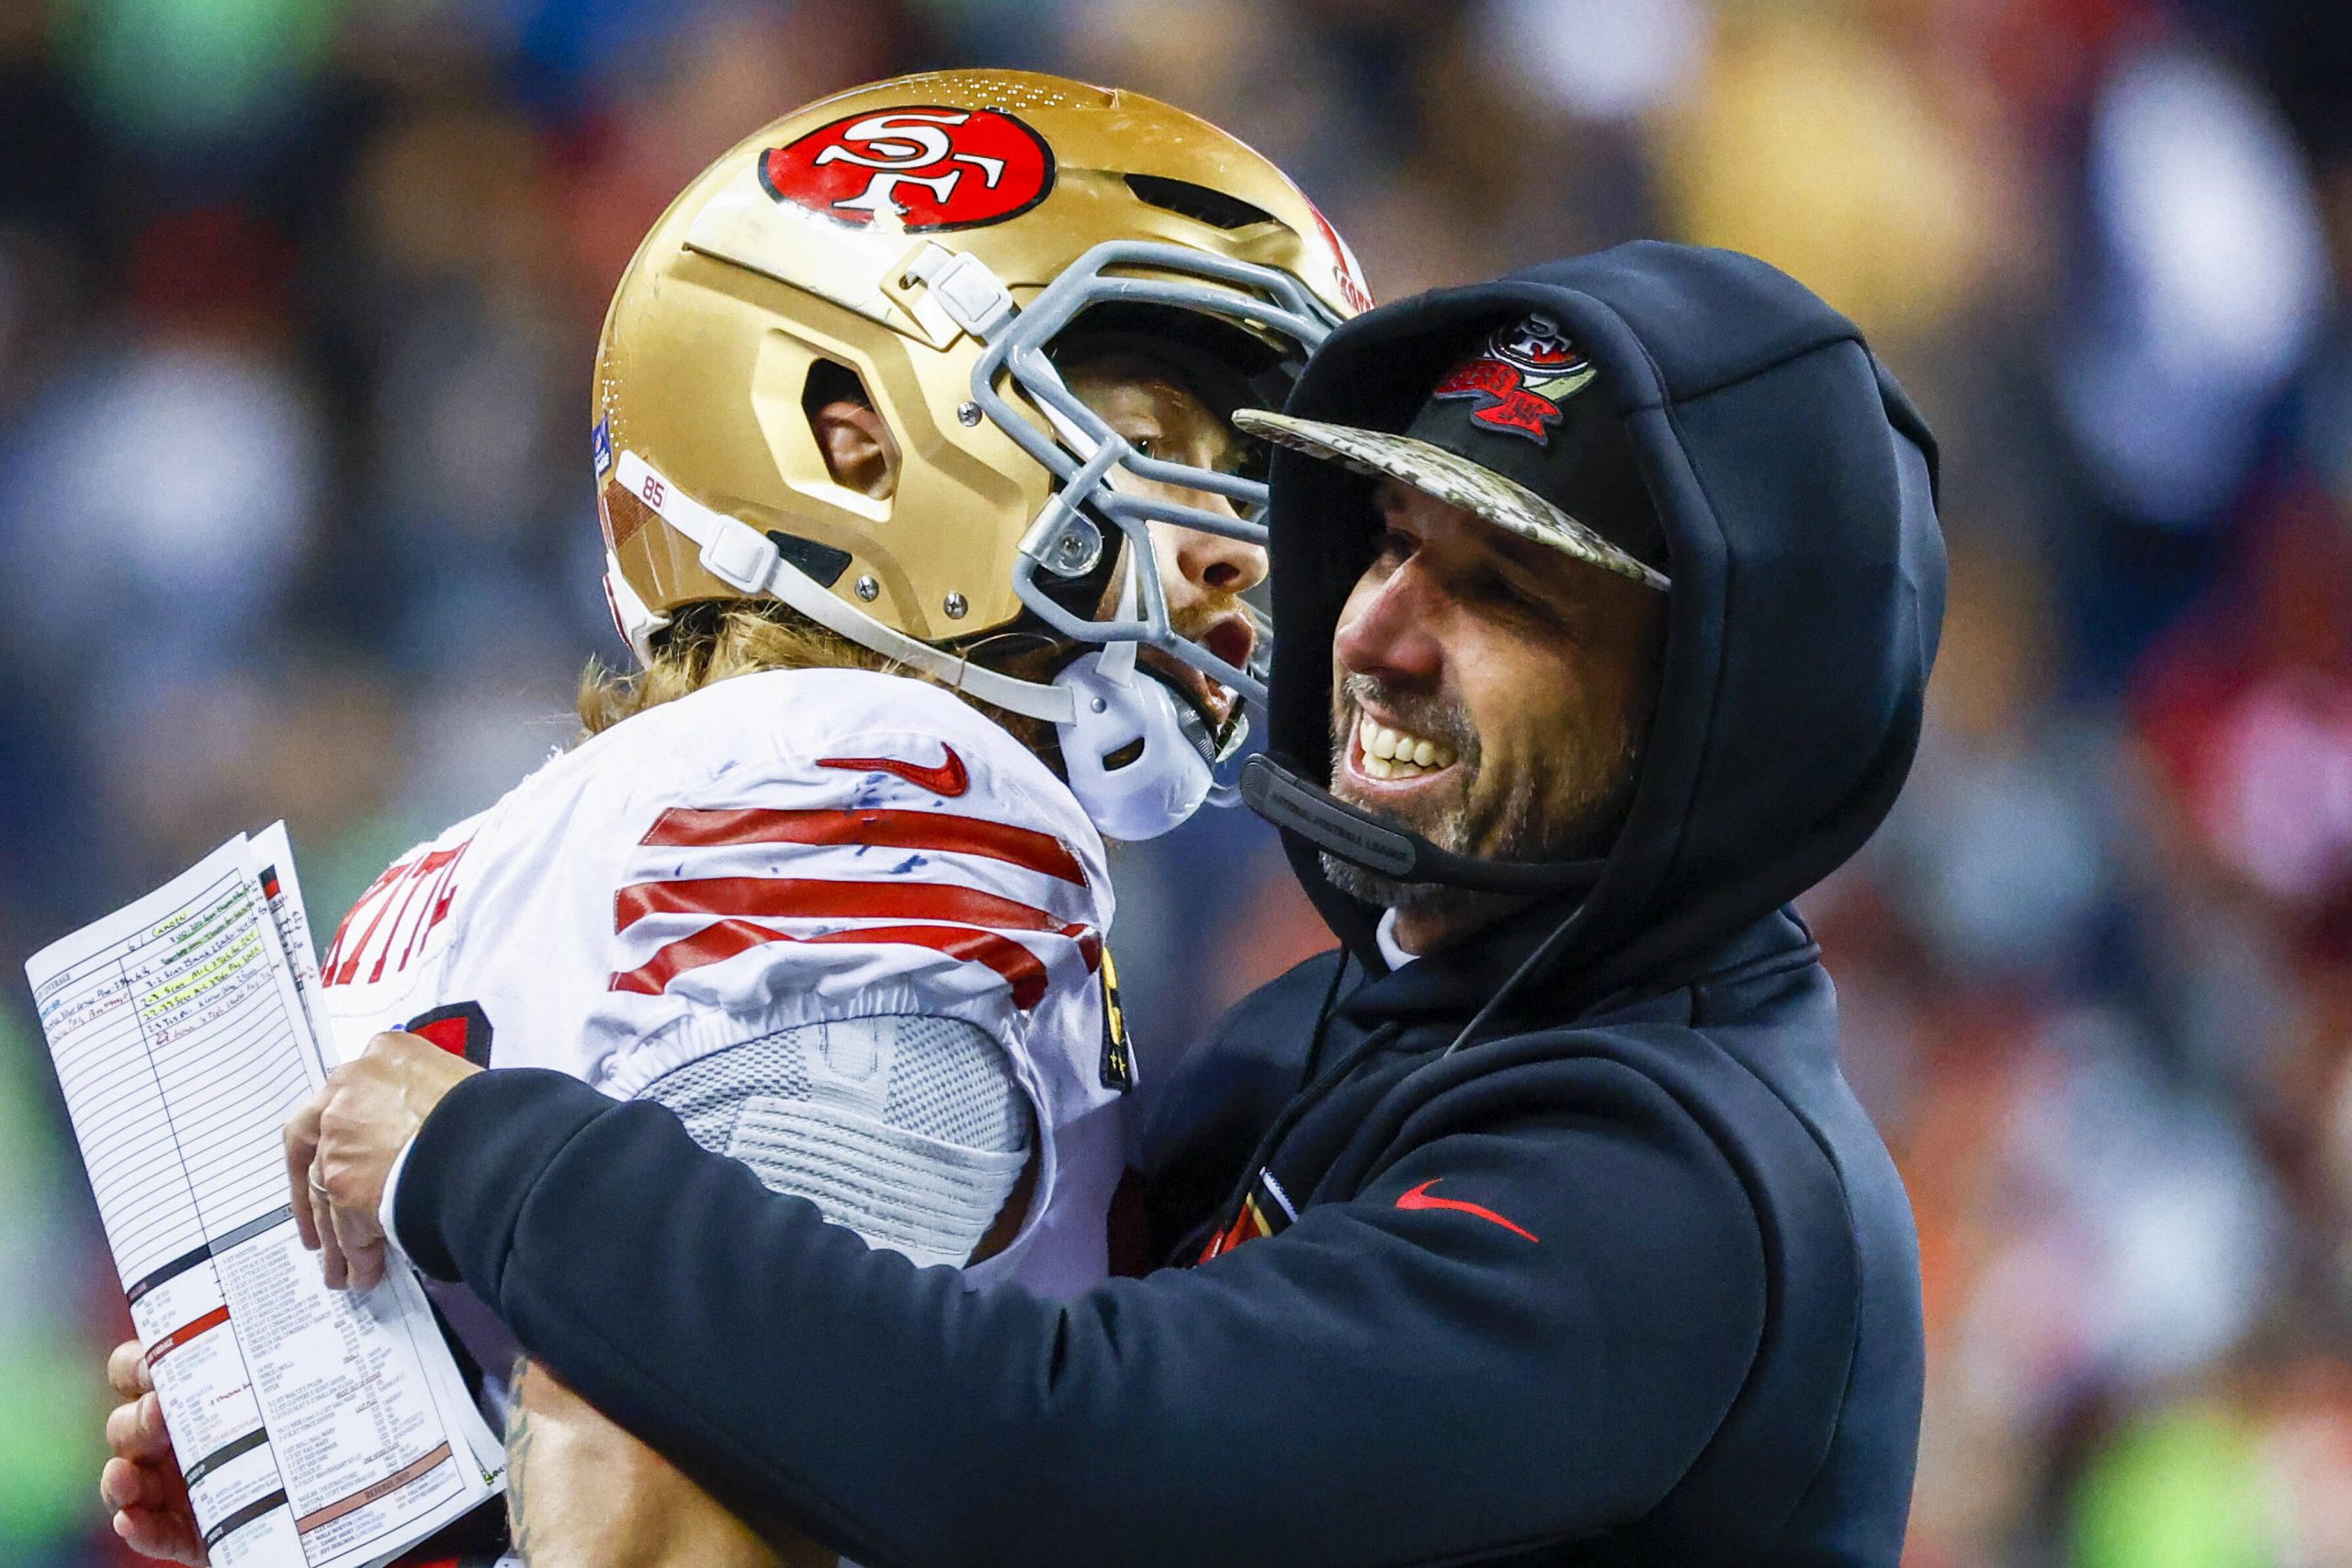 NFL, American Football Herren, USA San Francisco 49ers at Seattle Seahawks Dec 15, 2022 Seattle, Washington, USA San Francisco 49ers head coach Kyle Shanahan, right, hugs tight end George Kittle 85 during the late fourth quarter of a 21-13 victory against the Seattle Seahawks at Lumen Field. Seattle Lumen Field Washington USA, EDITORIAL USE ONLY PUBLICATIONxINxGERxSUIxAUTxONLY Copyright: xJoexNicholsonx 20221215_jmn_sn8_036